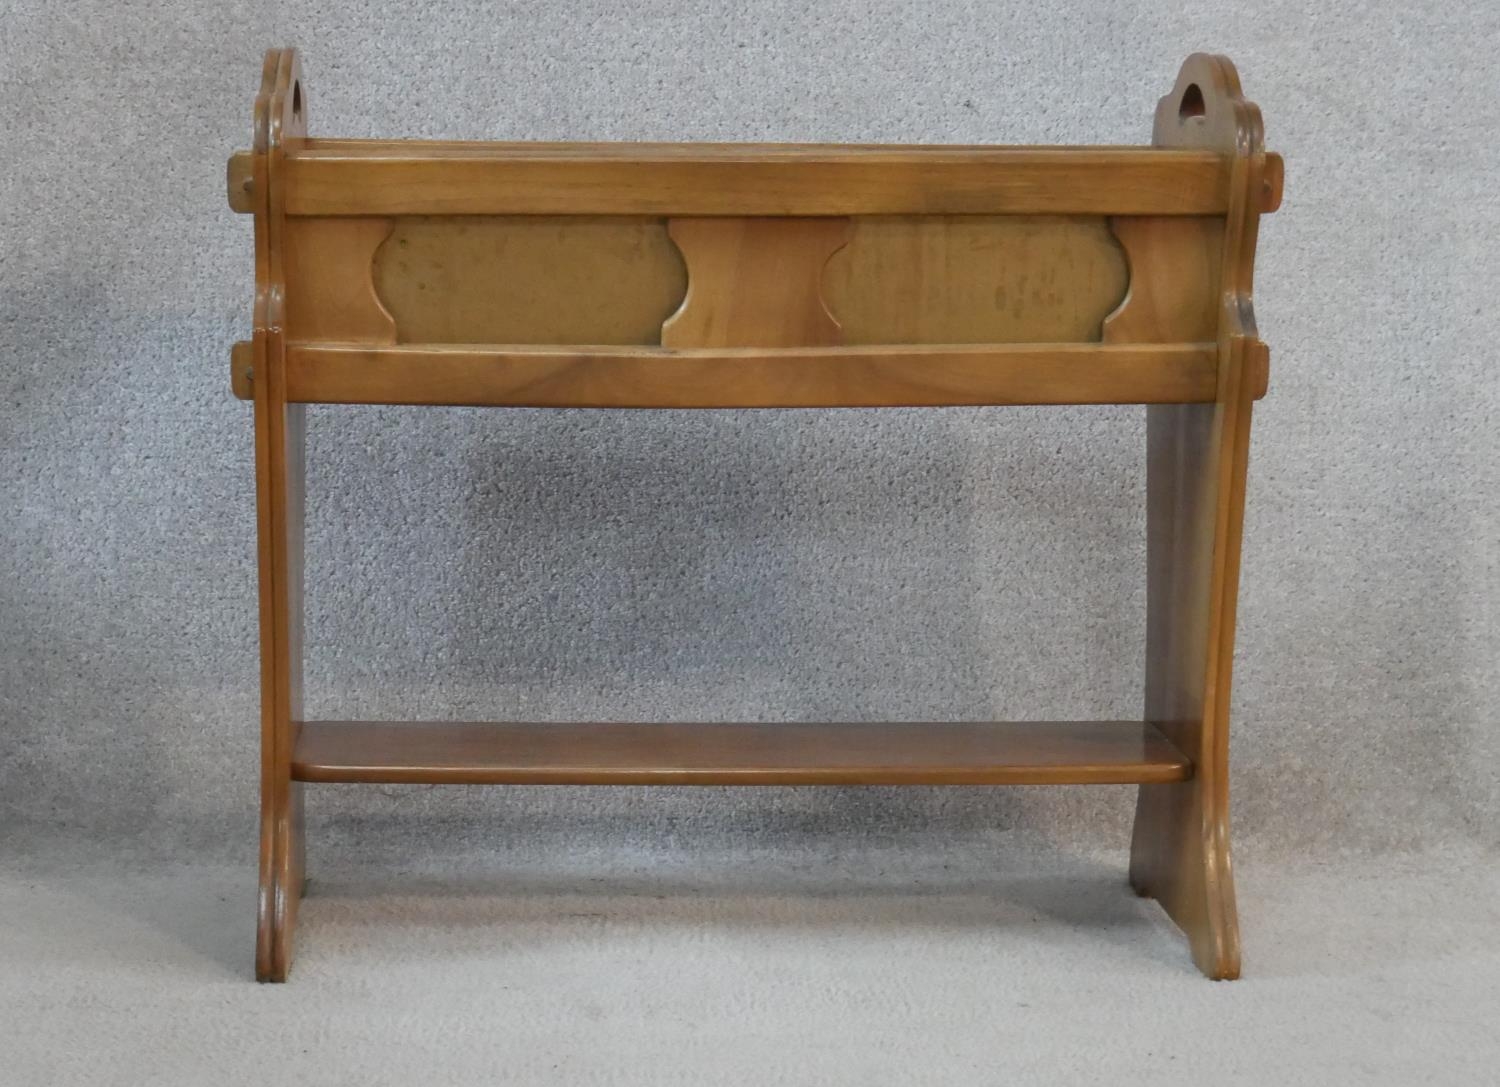 A late 19th century walnut plant trough stand with fitted zinc liner. H.55.5 L.58 W.26cm